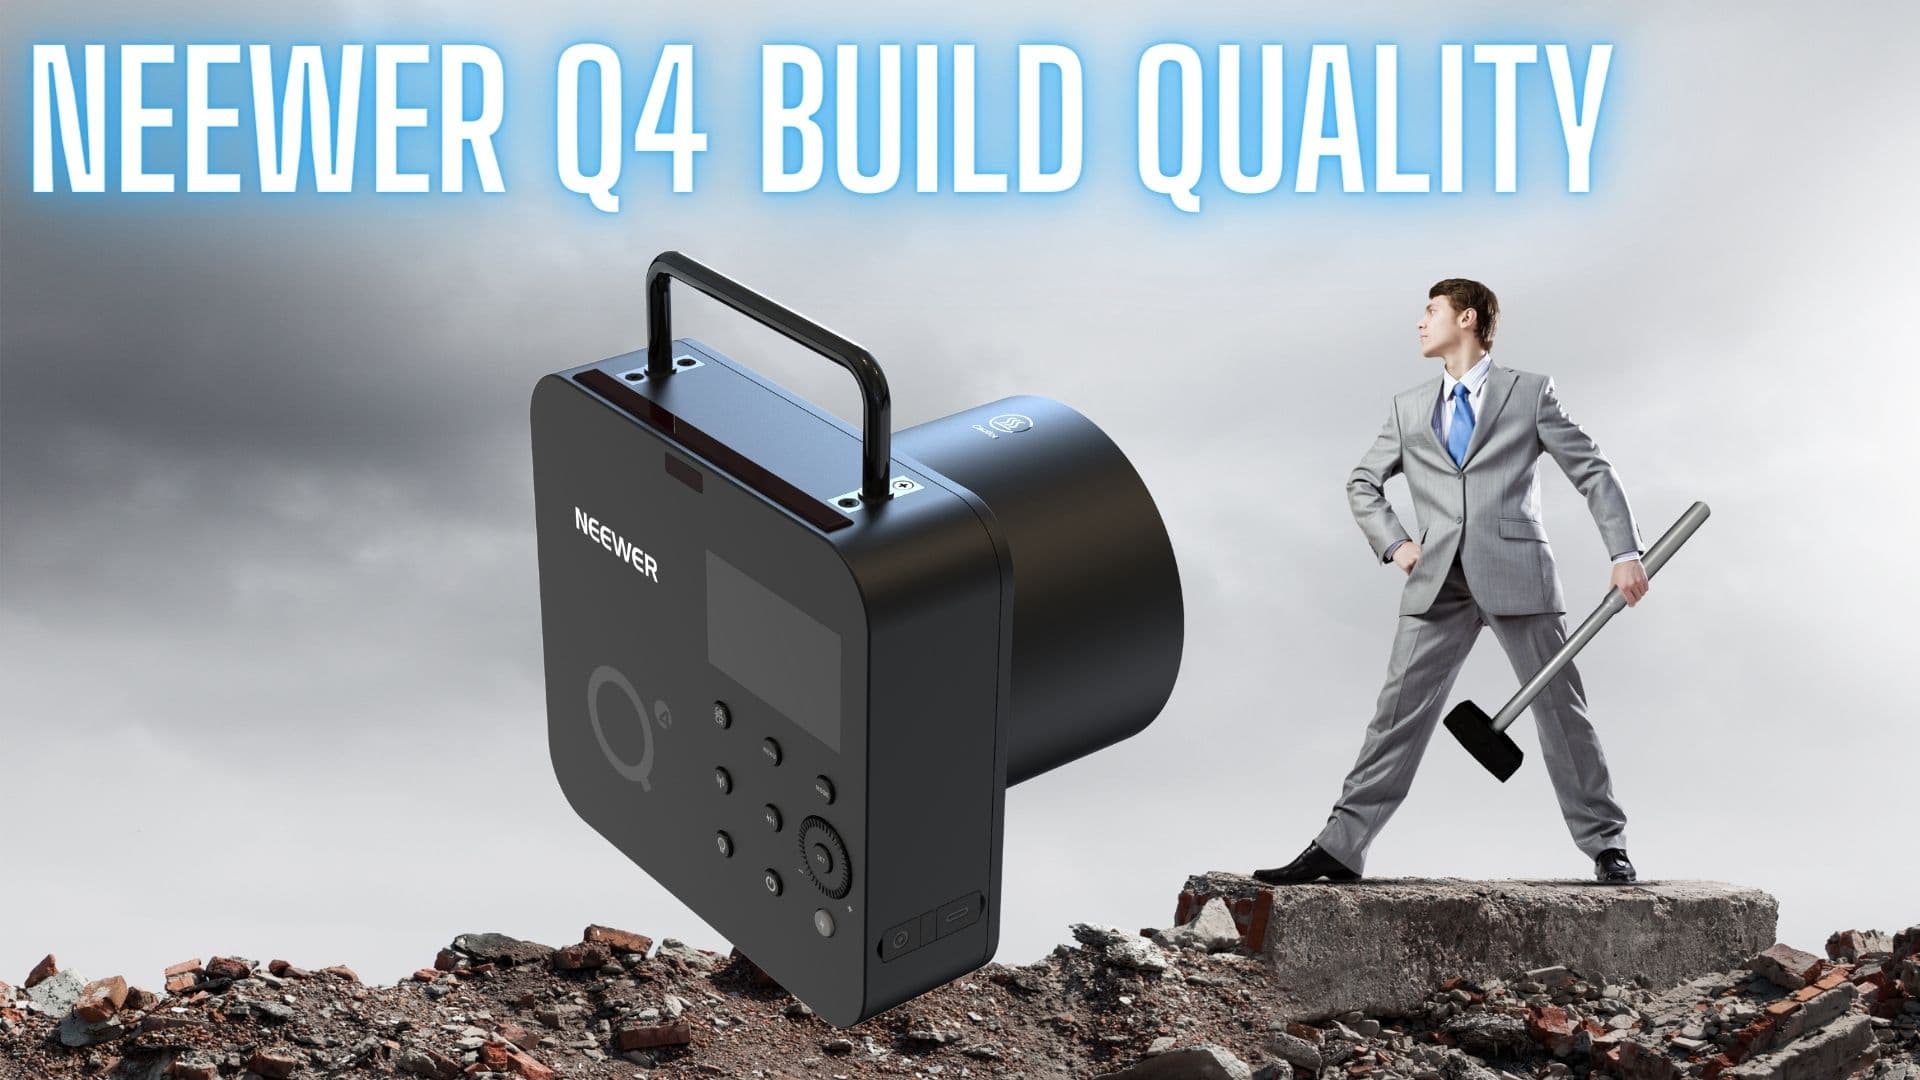 A photograph of the Neewer Q4 with a man in the background with a hammer looking at text saying "Neewer Q4 build quality"